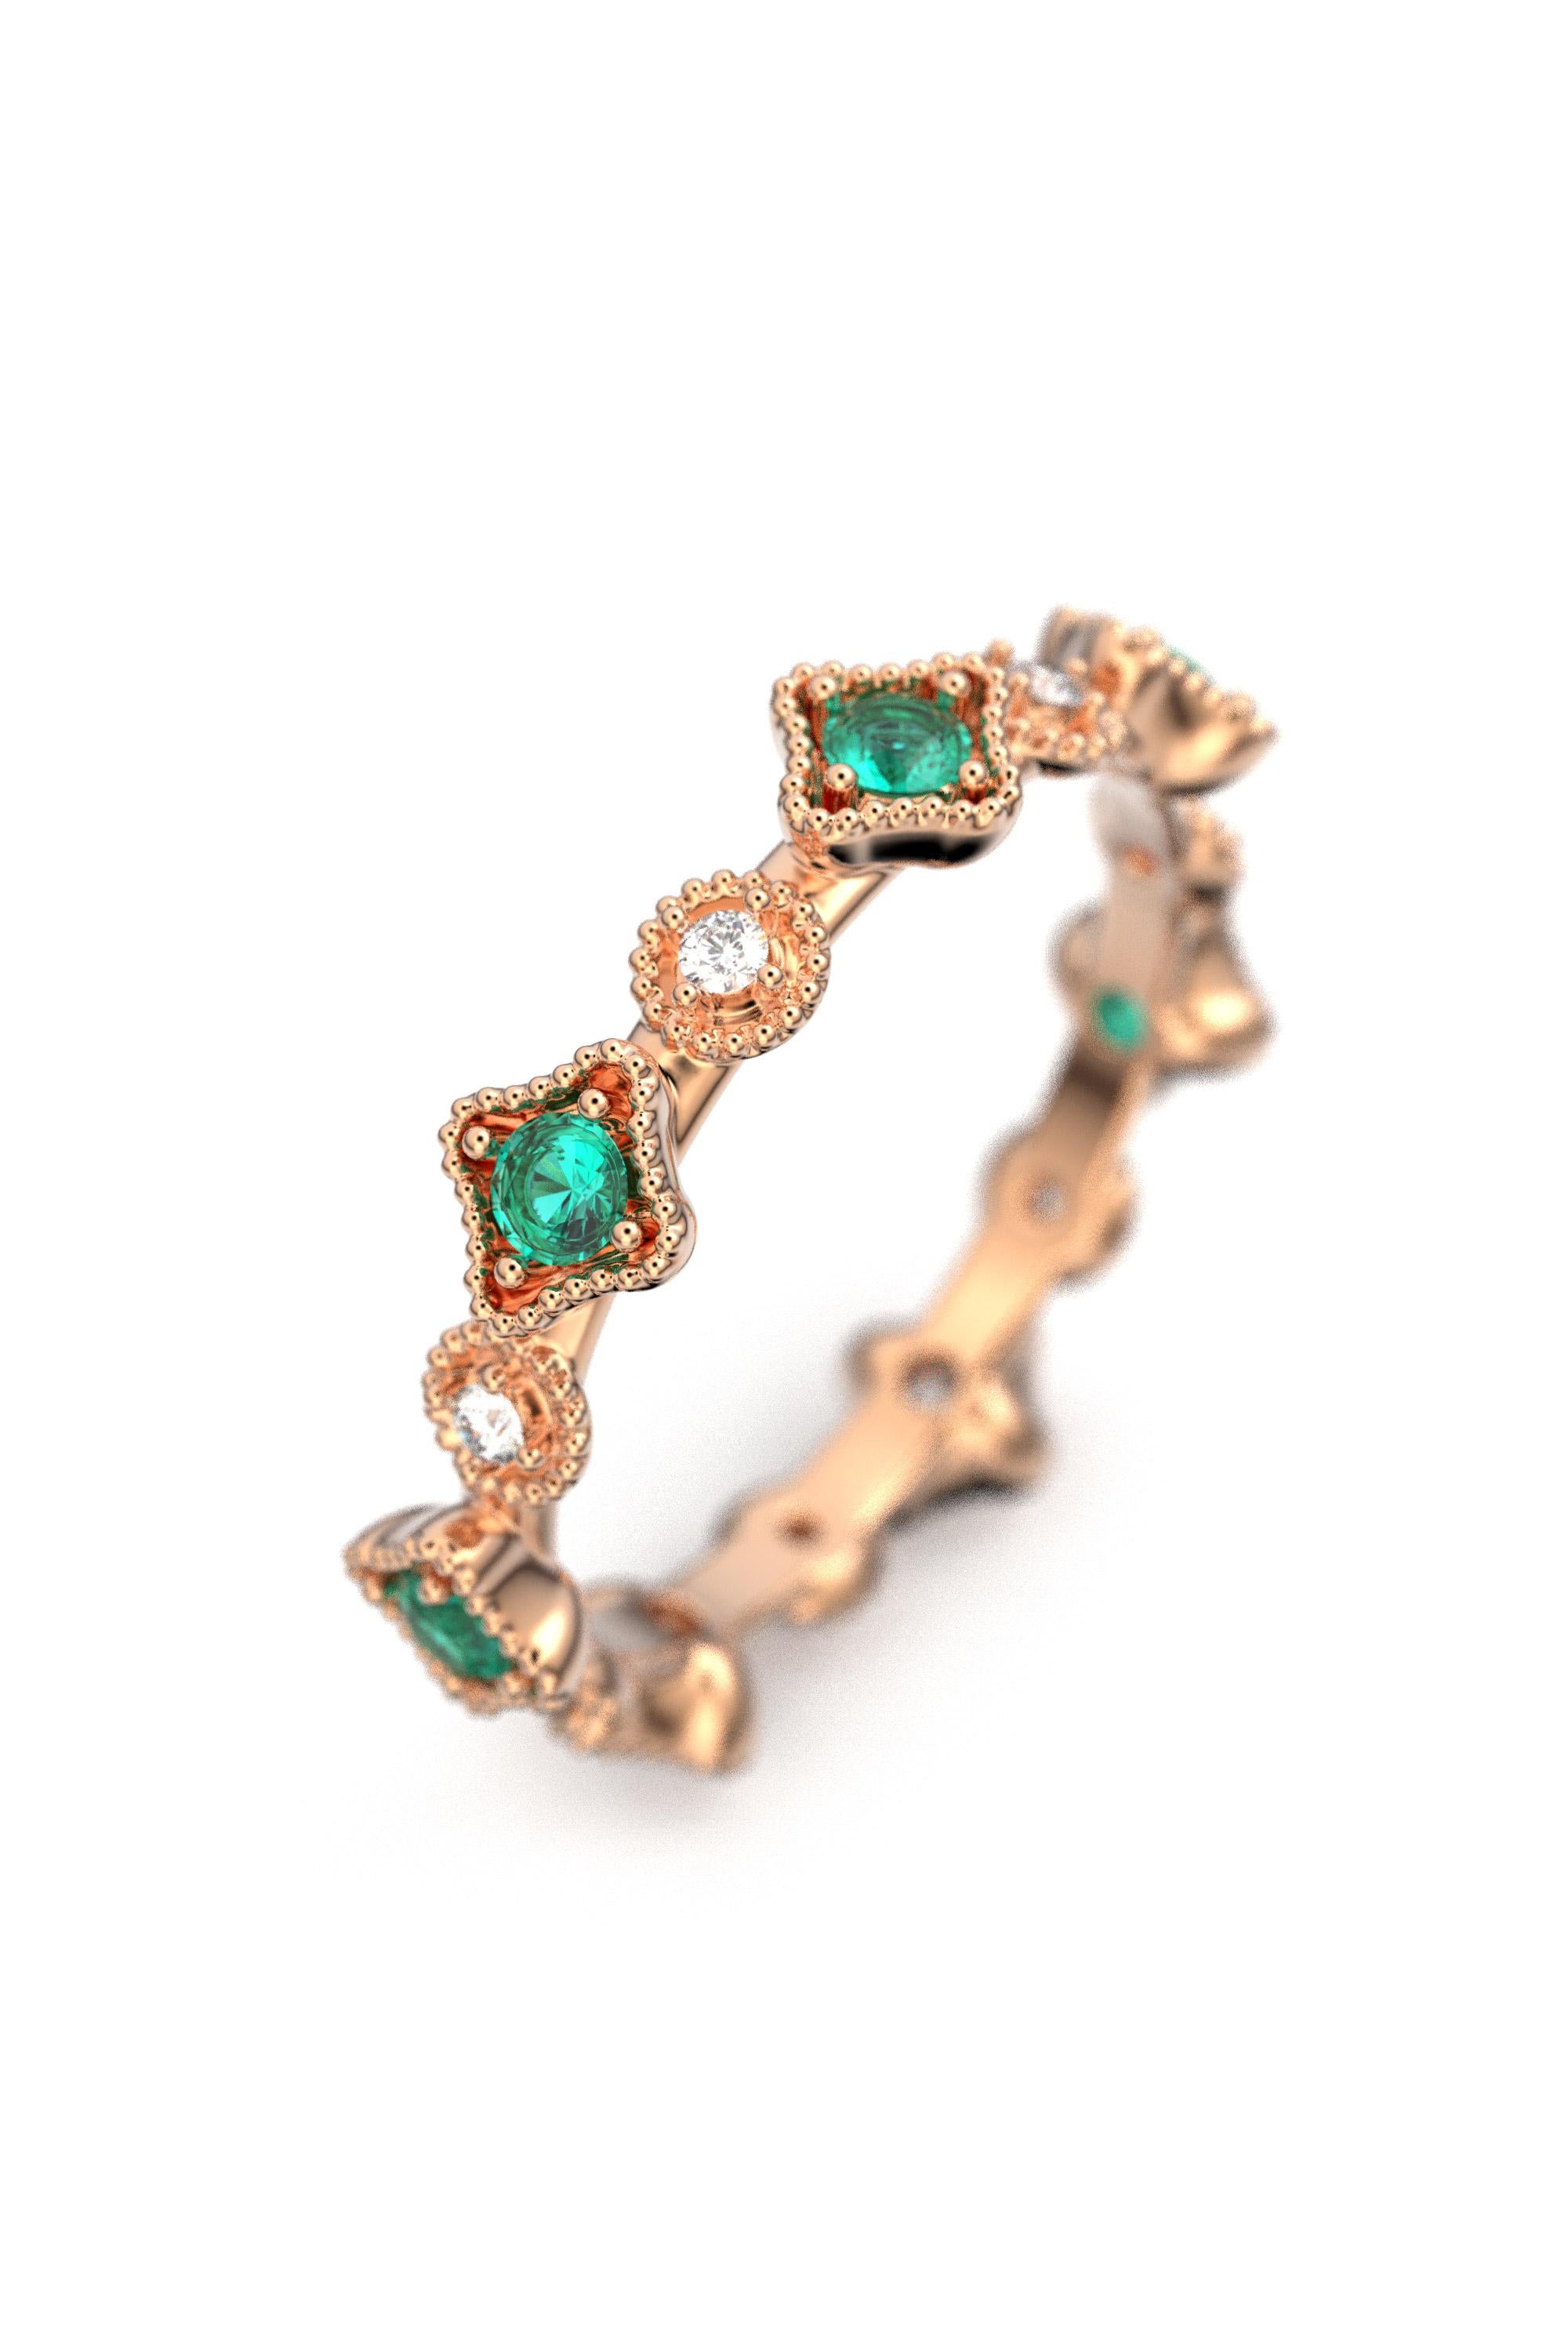 For Sale:  18k Gold Eternity Band with Natural Emerald and Diamonds, Made in Italy Jewelry 9